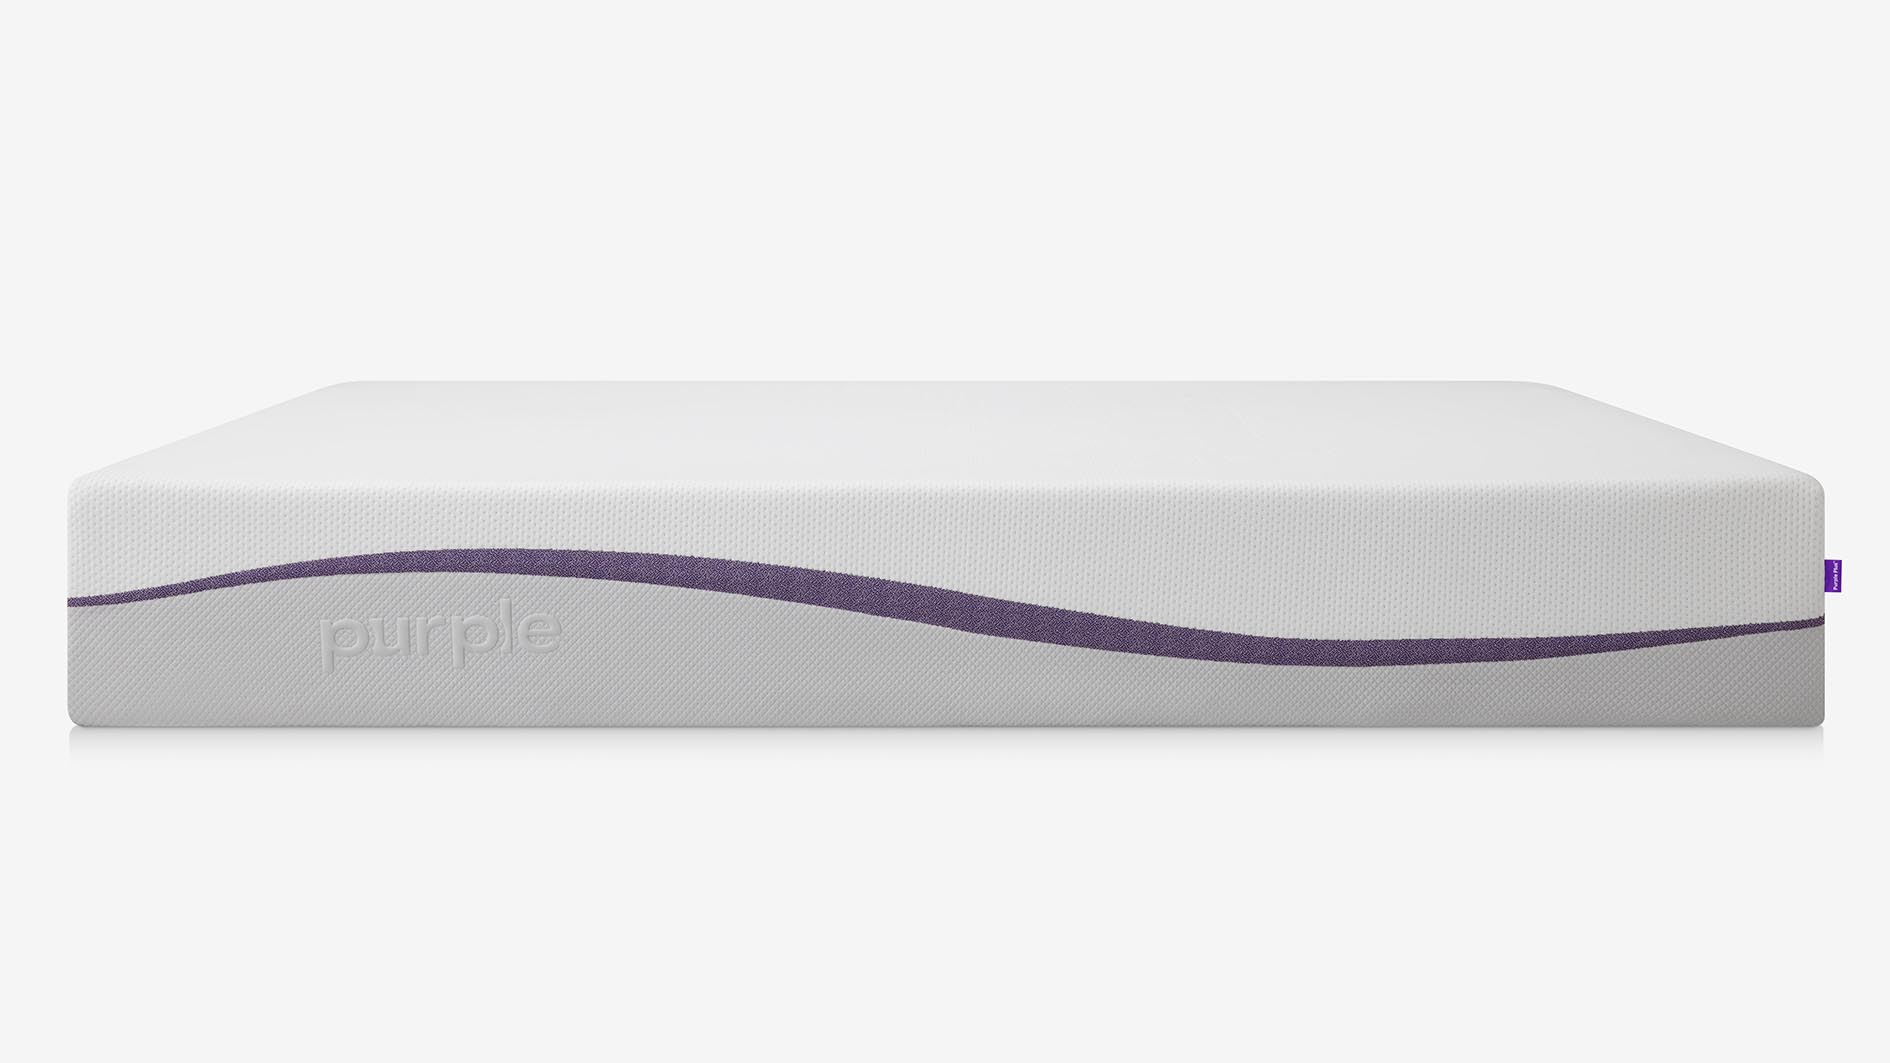 Purple Plus Mattress review: The mattress shown from the side with a light gray base, white top and purple curved stripe down the middle